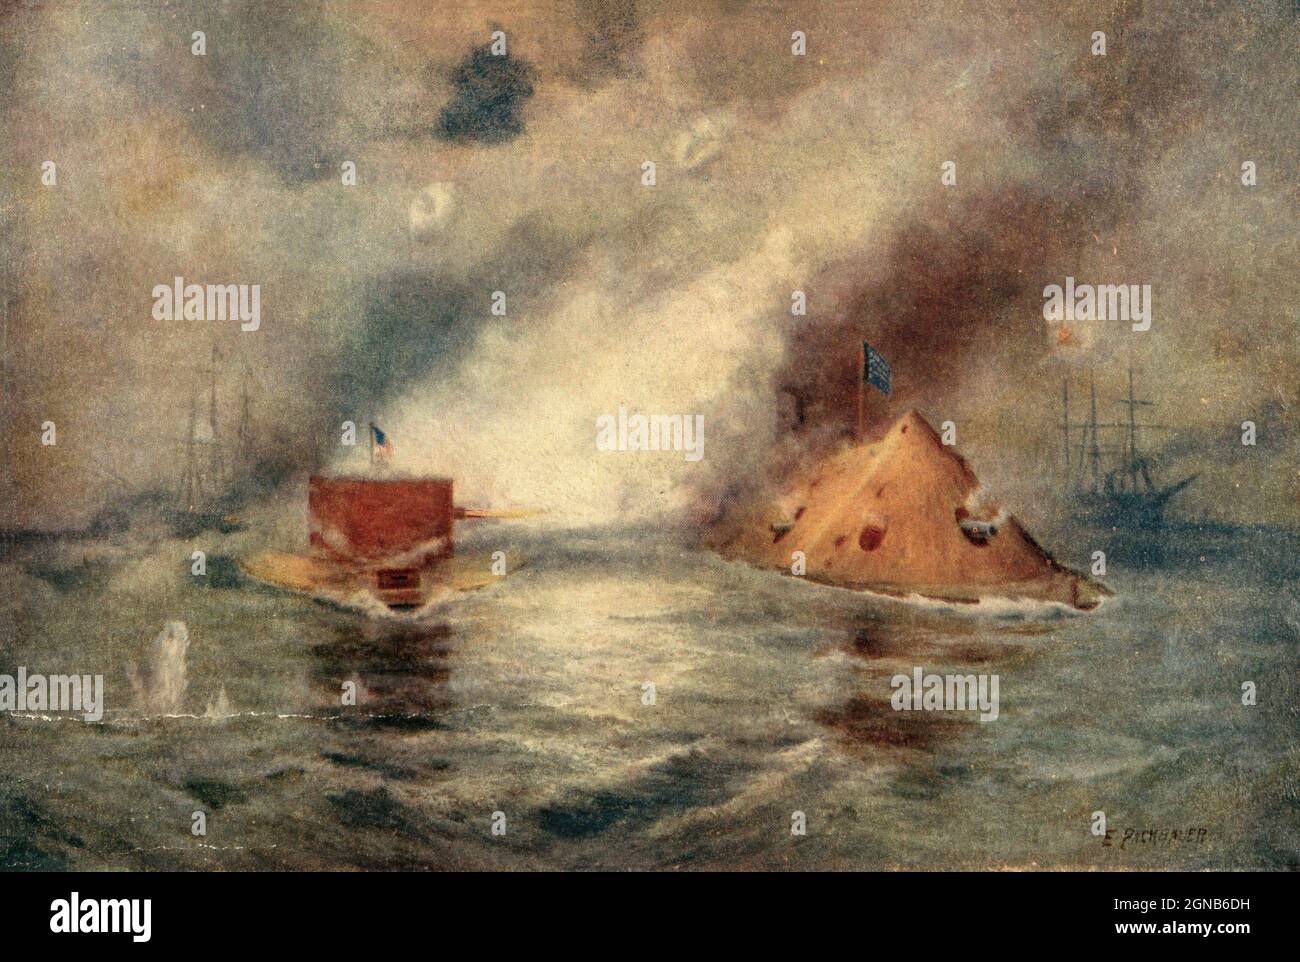 Battle of the Monitor and Merrimack, also called Battle of Hampton Roads, (March 9, 1862), in the American Civil War, naval engagement at Hampton Roads, Virginia, a harbour at the mouth of the James River, notable as history's first duel between ironclad warships and the beginning of a new era of naval warfare. Color artwork painting from the book ' The Civil war through the camera ' hundreds of vivid photographs actually taken in Civil war times, sixteen reproductions in color of famous war paintings. The new text history by Henry W. Elson. A. complete illustrated history of the Civil war Stock Photo